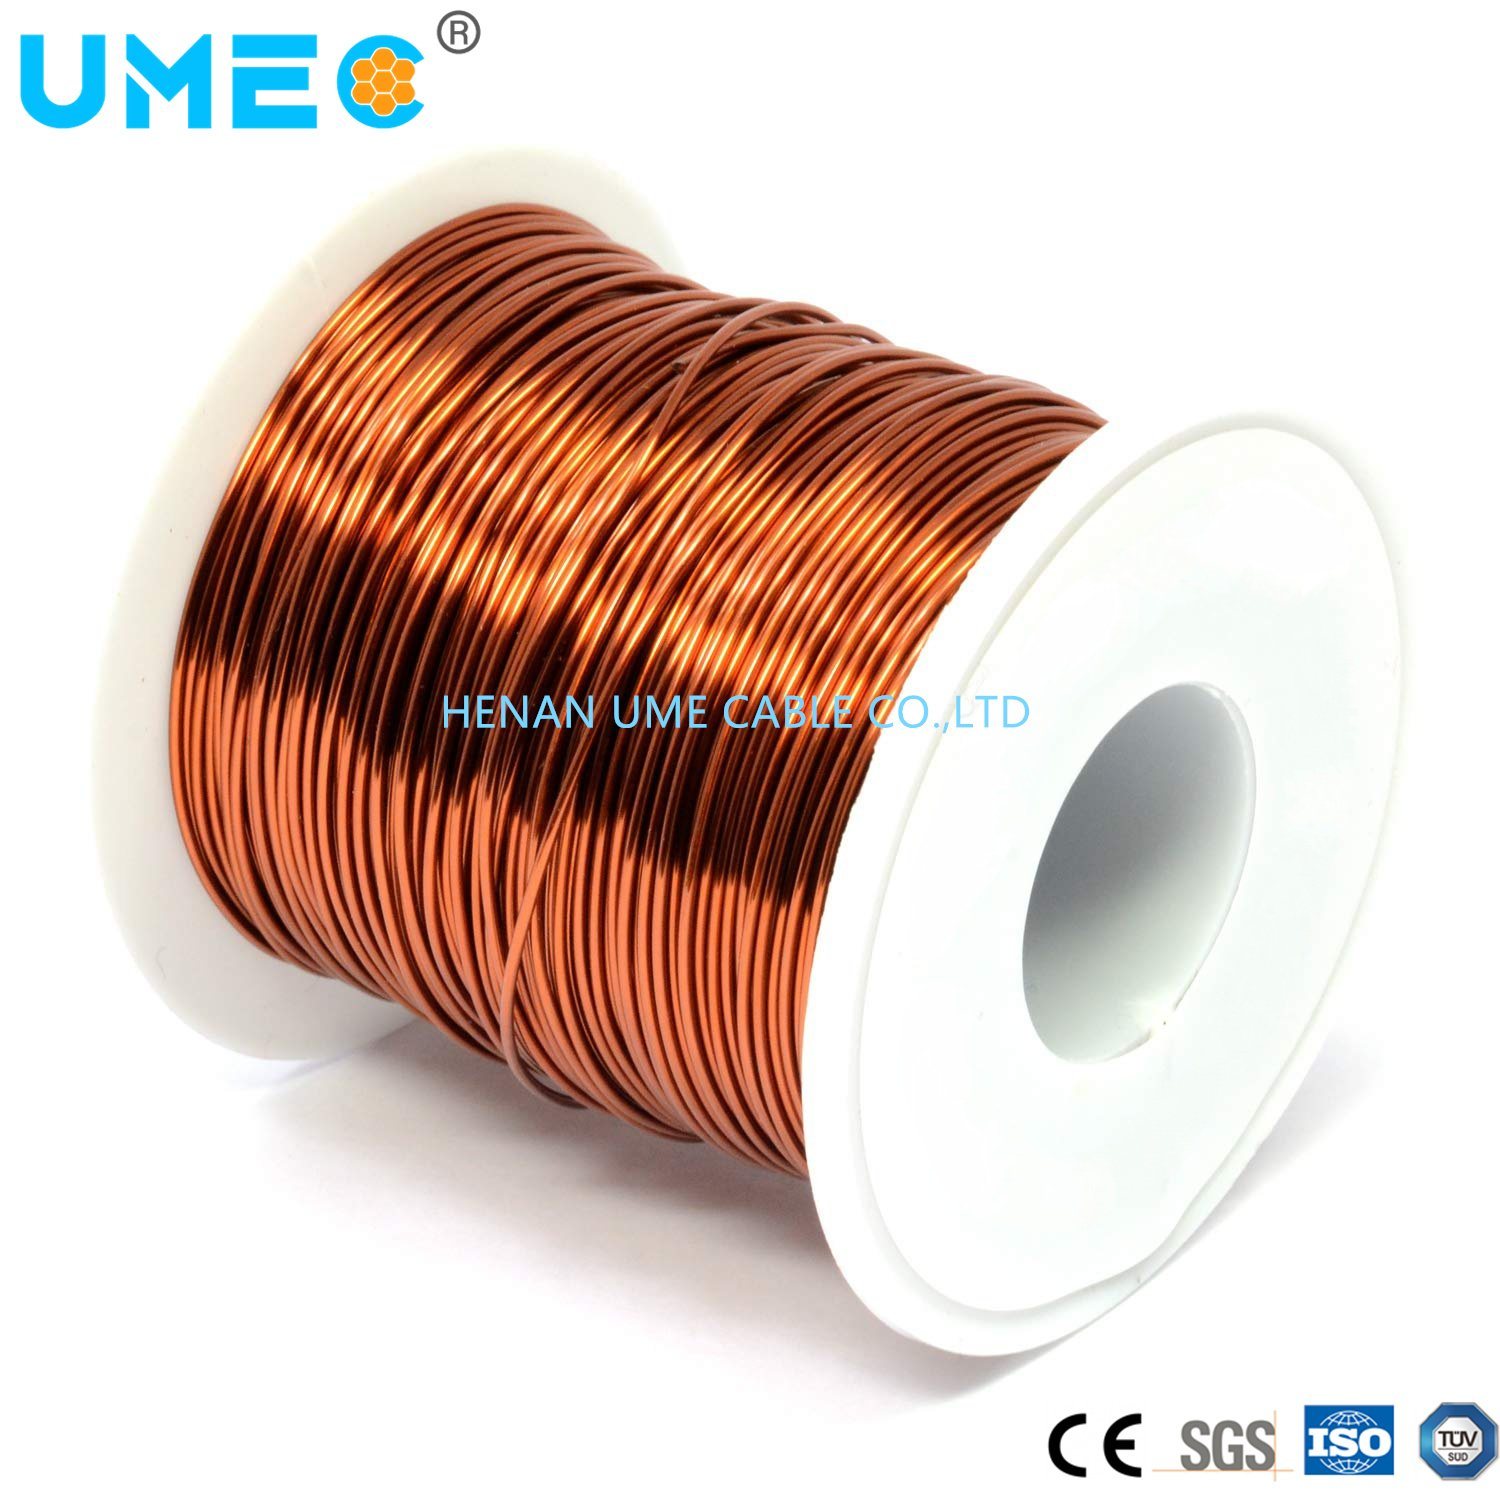 Enameled Wire Factory Direct Sale Magnet Enameled Copper Clad Aluminum Wire for Winding Motor Transformer